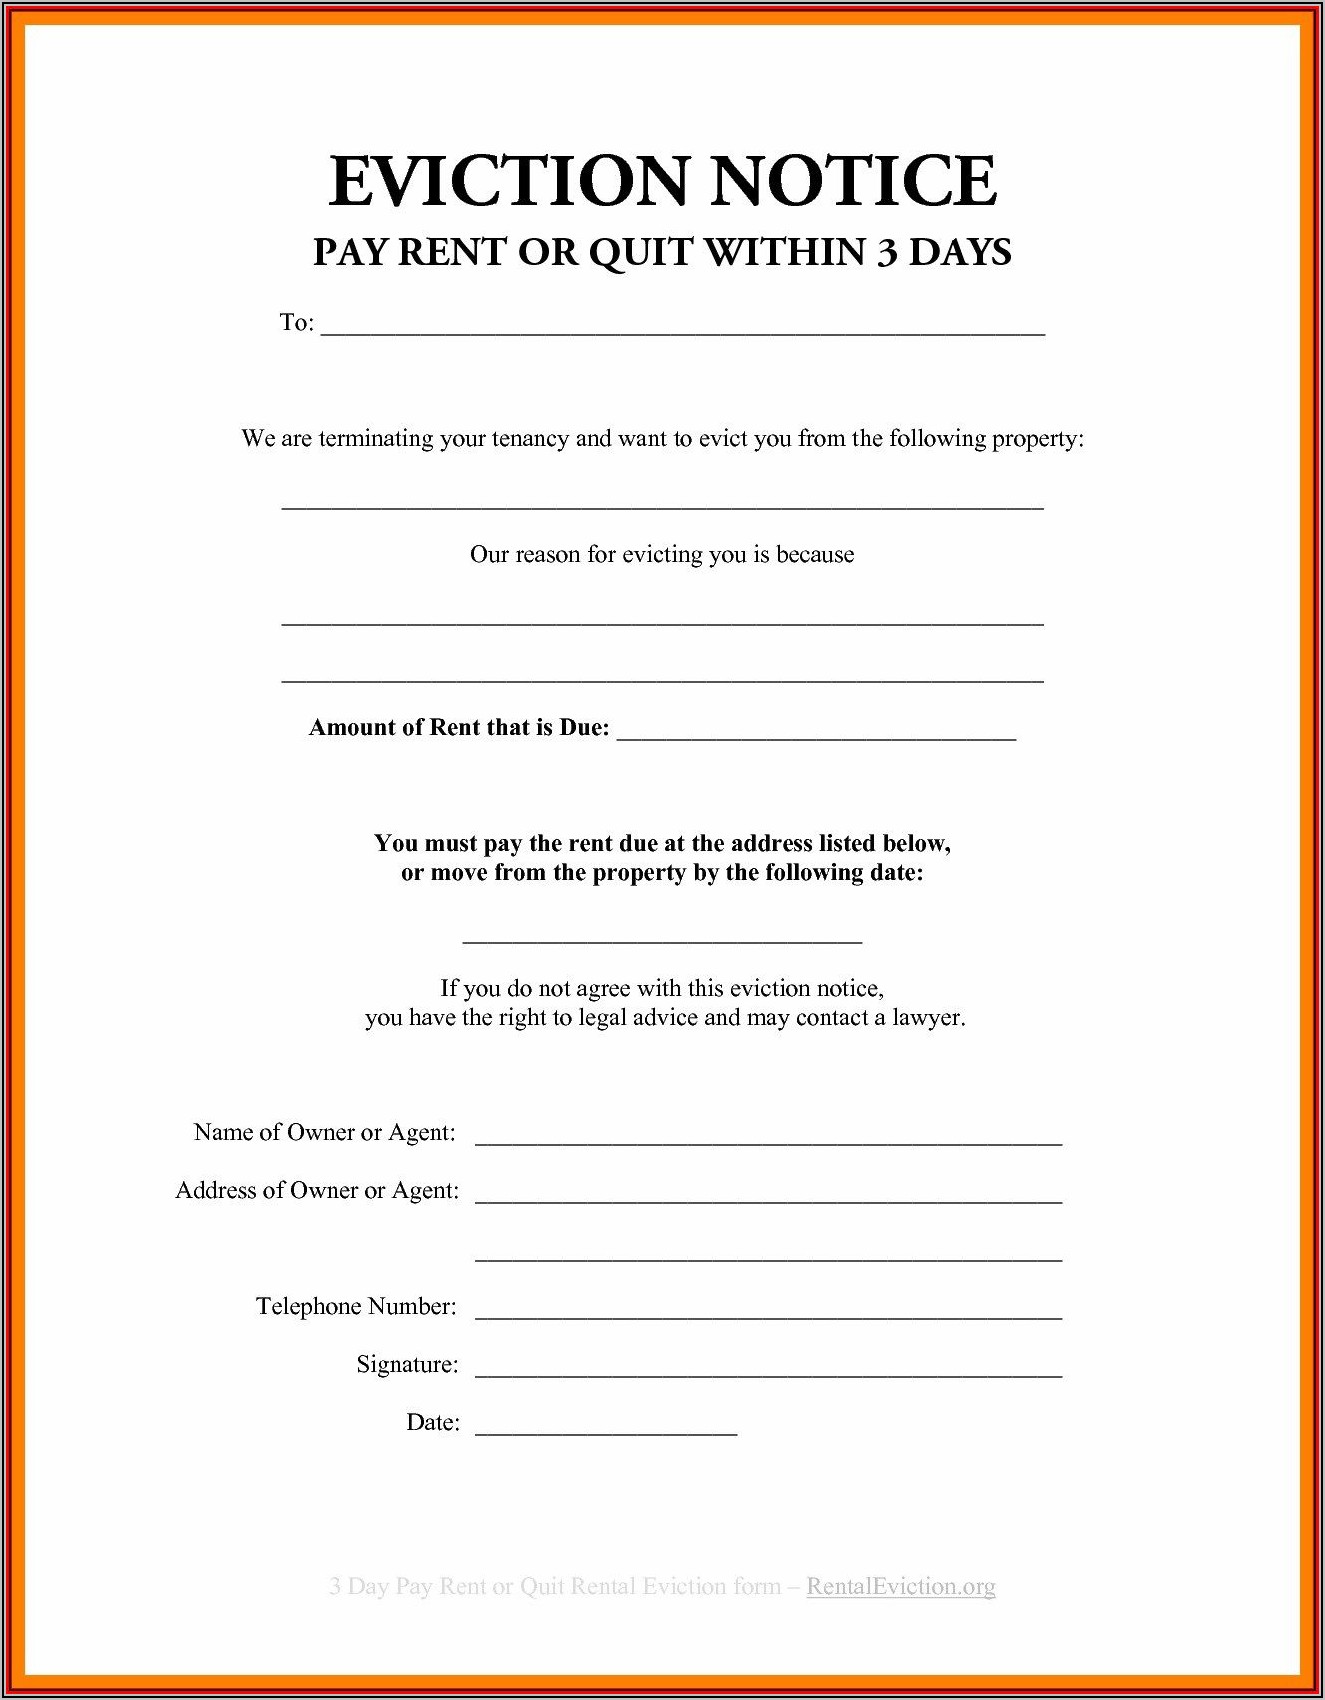 Template For Eviction Notice Uk